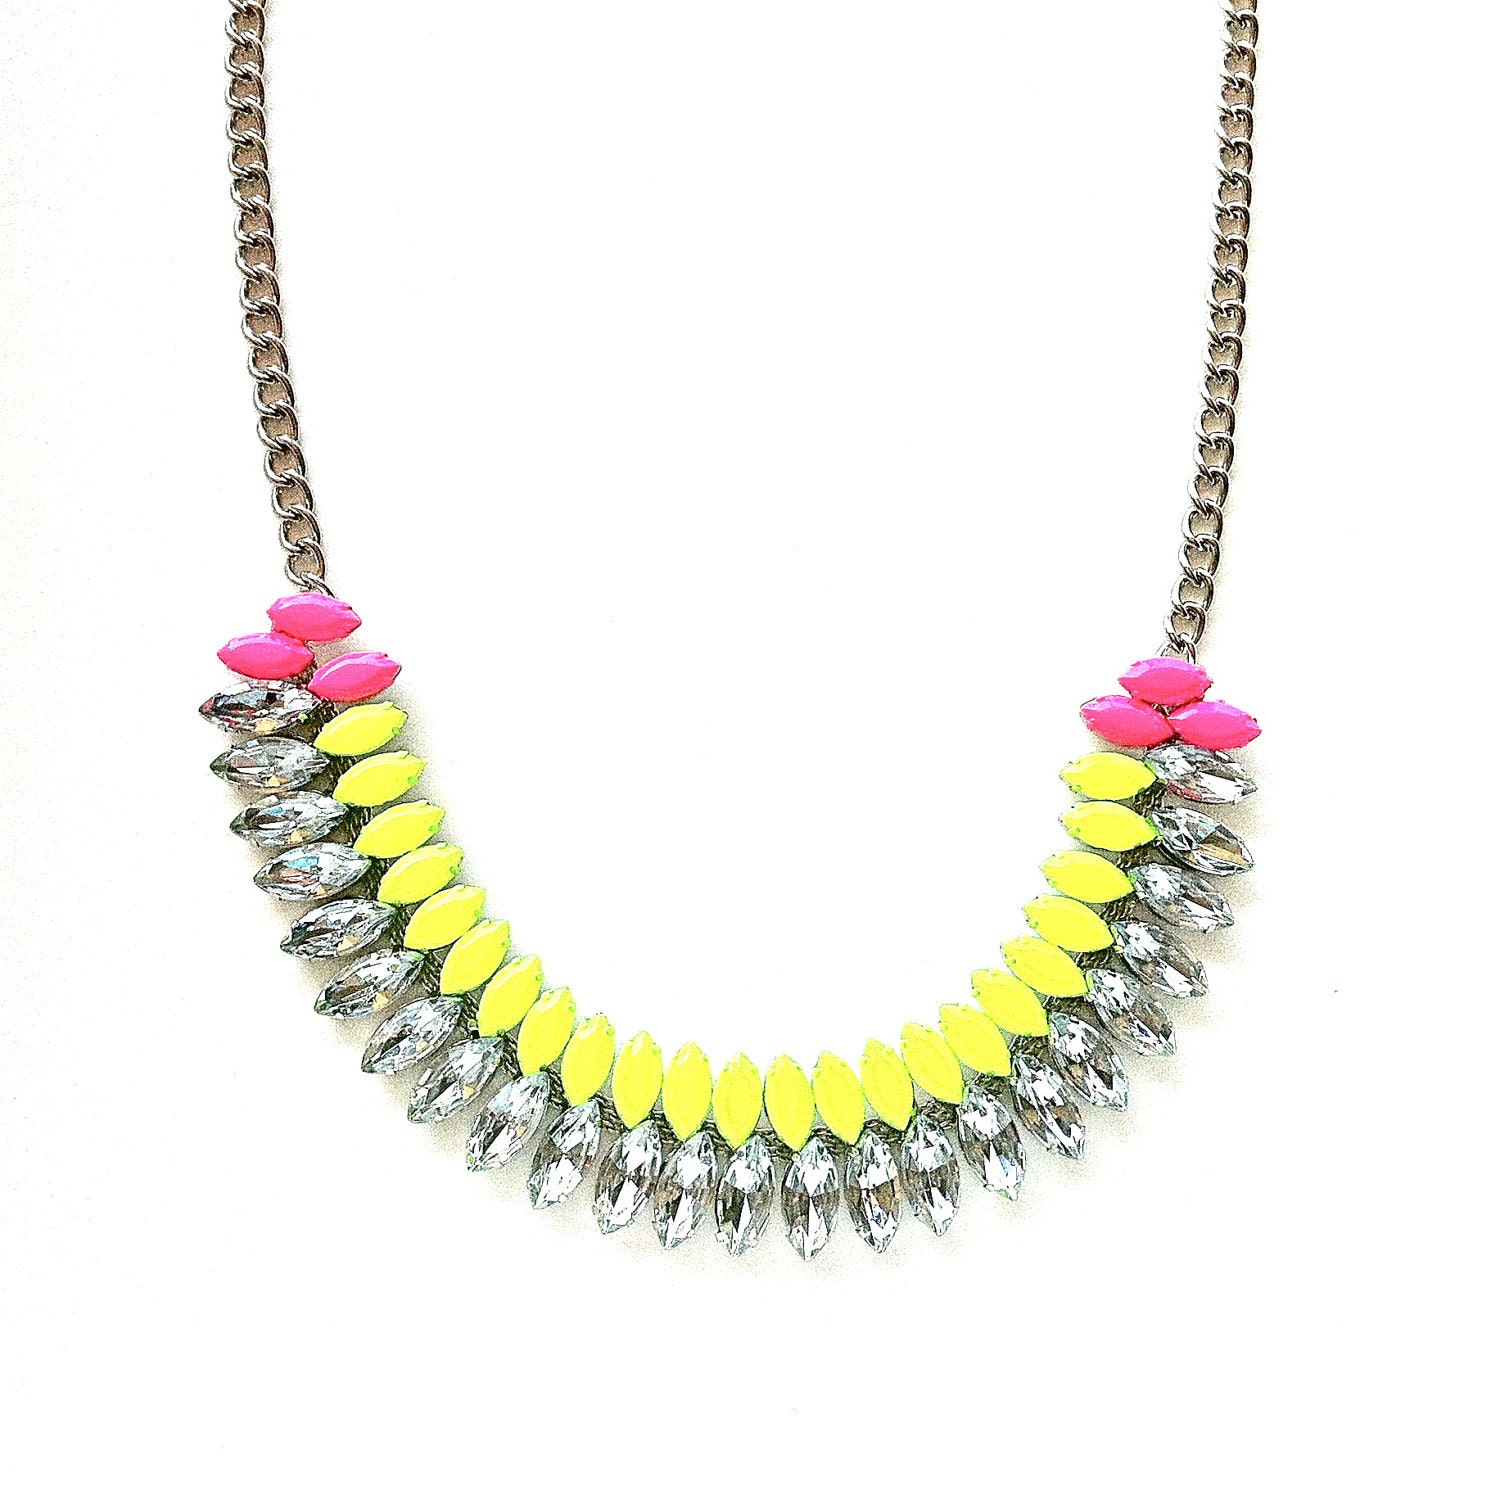 Neon Yellow and Neon Pink Hand-painted Crystal Necklace